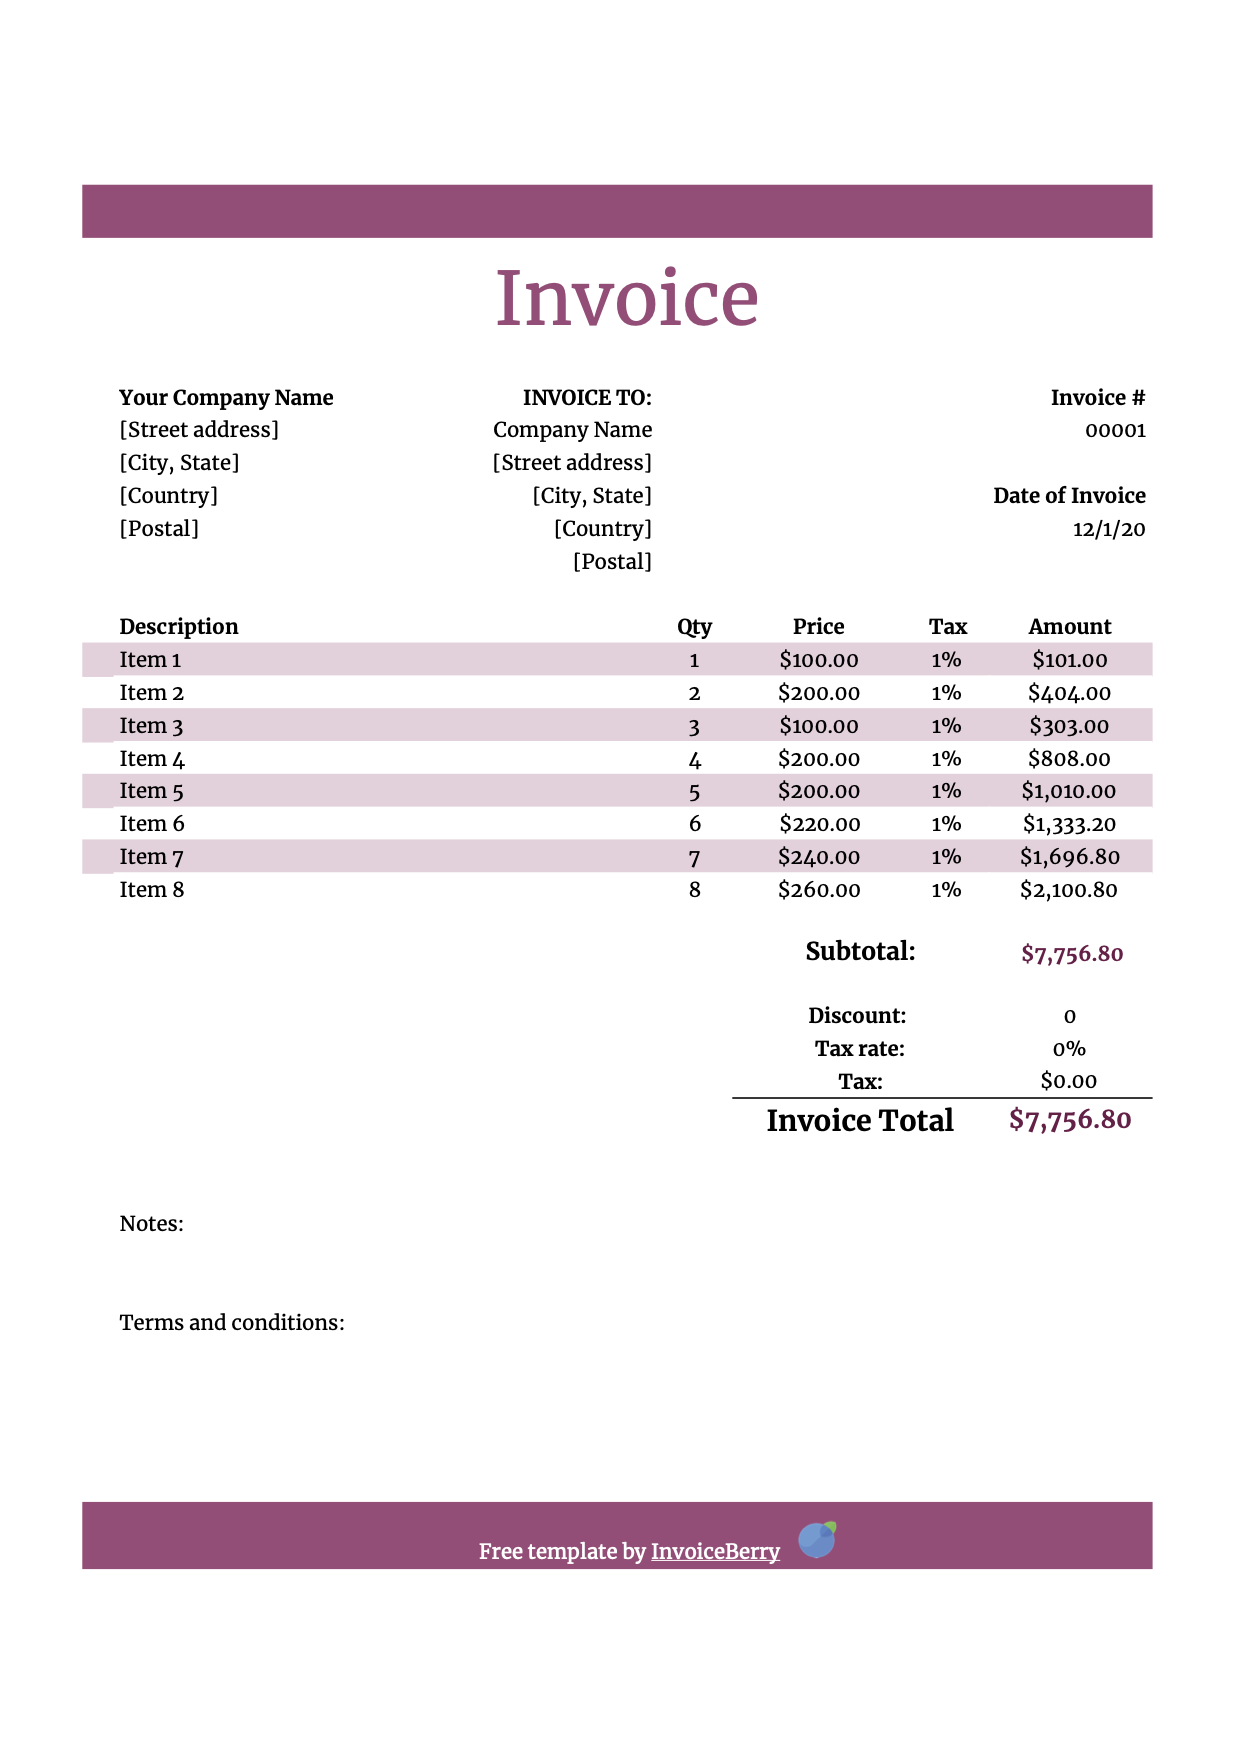 Free Numbers invoice templates - get invoice templates for Mac Throughout Ipad Invoice Template